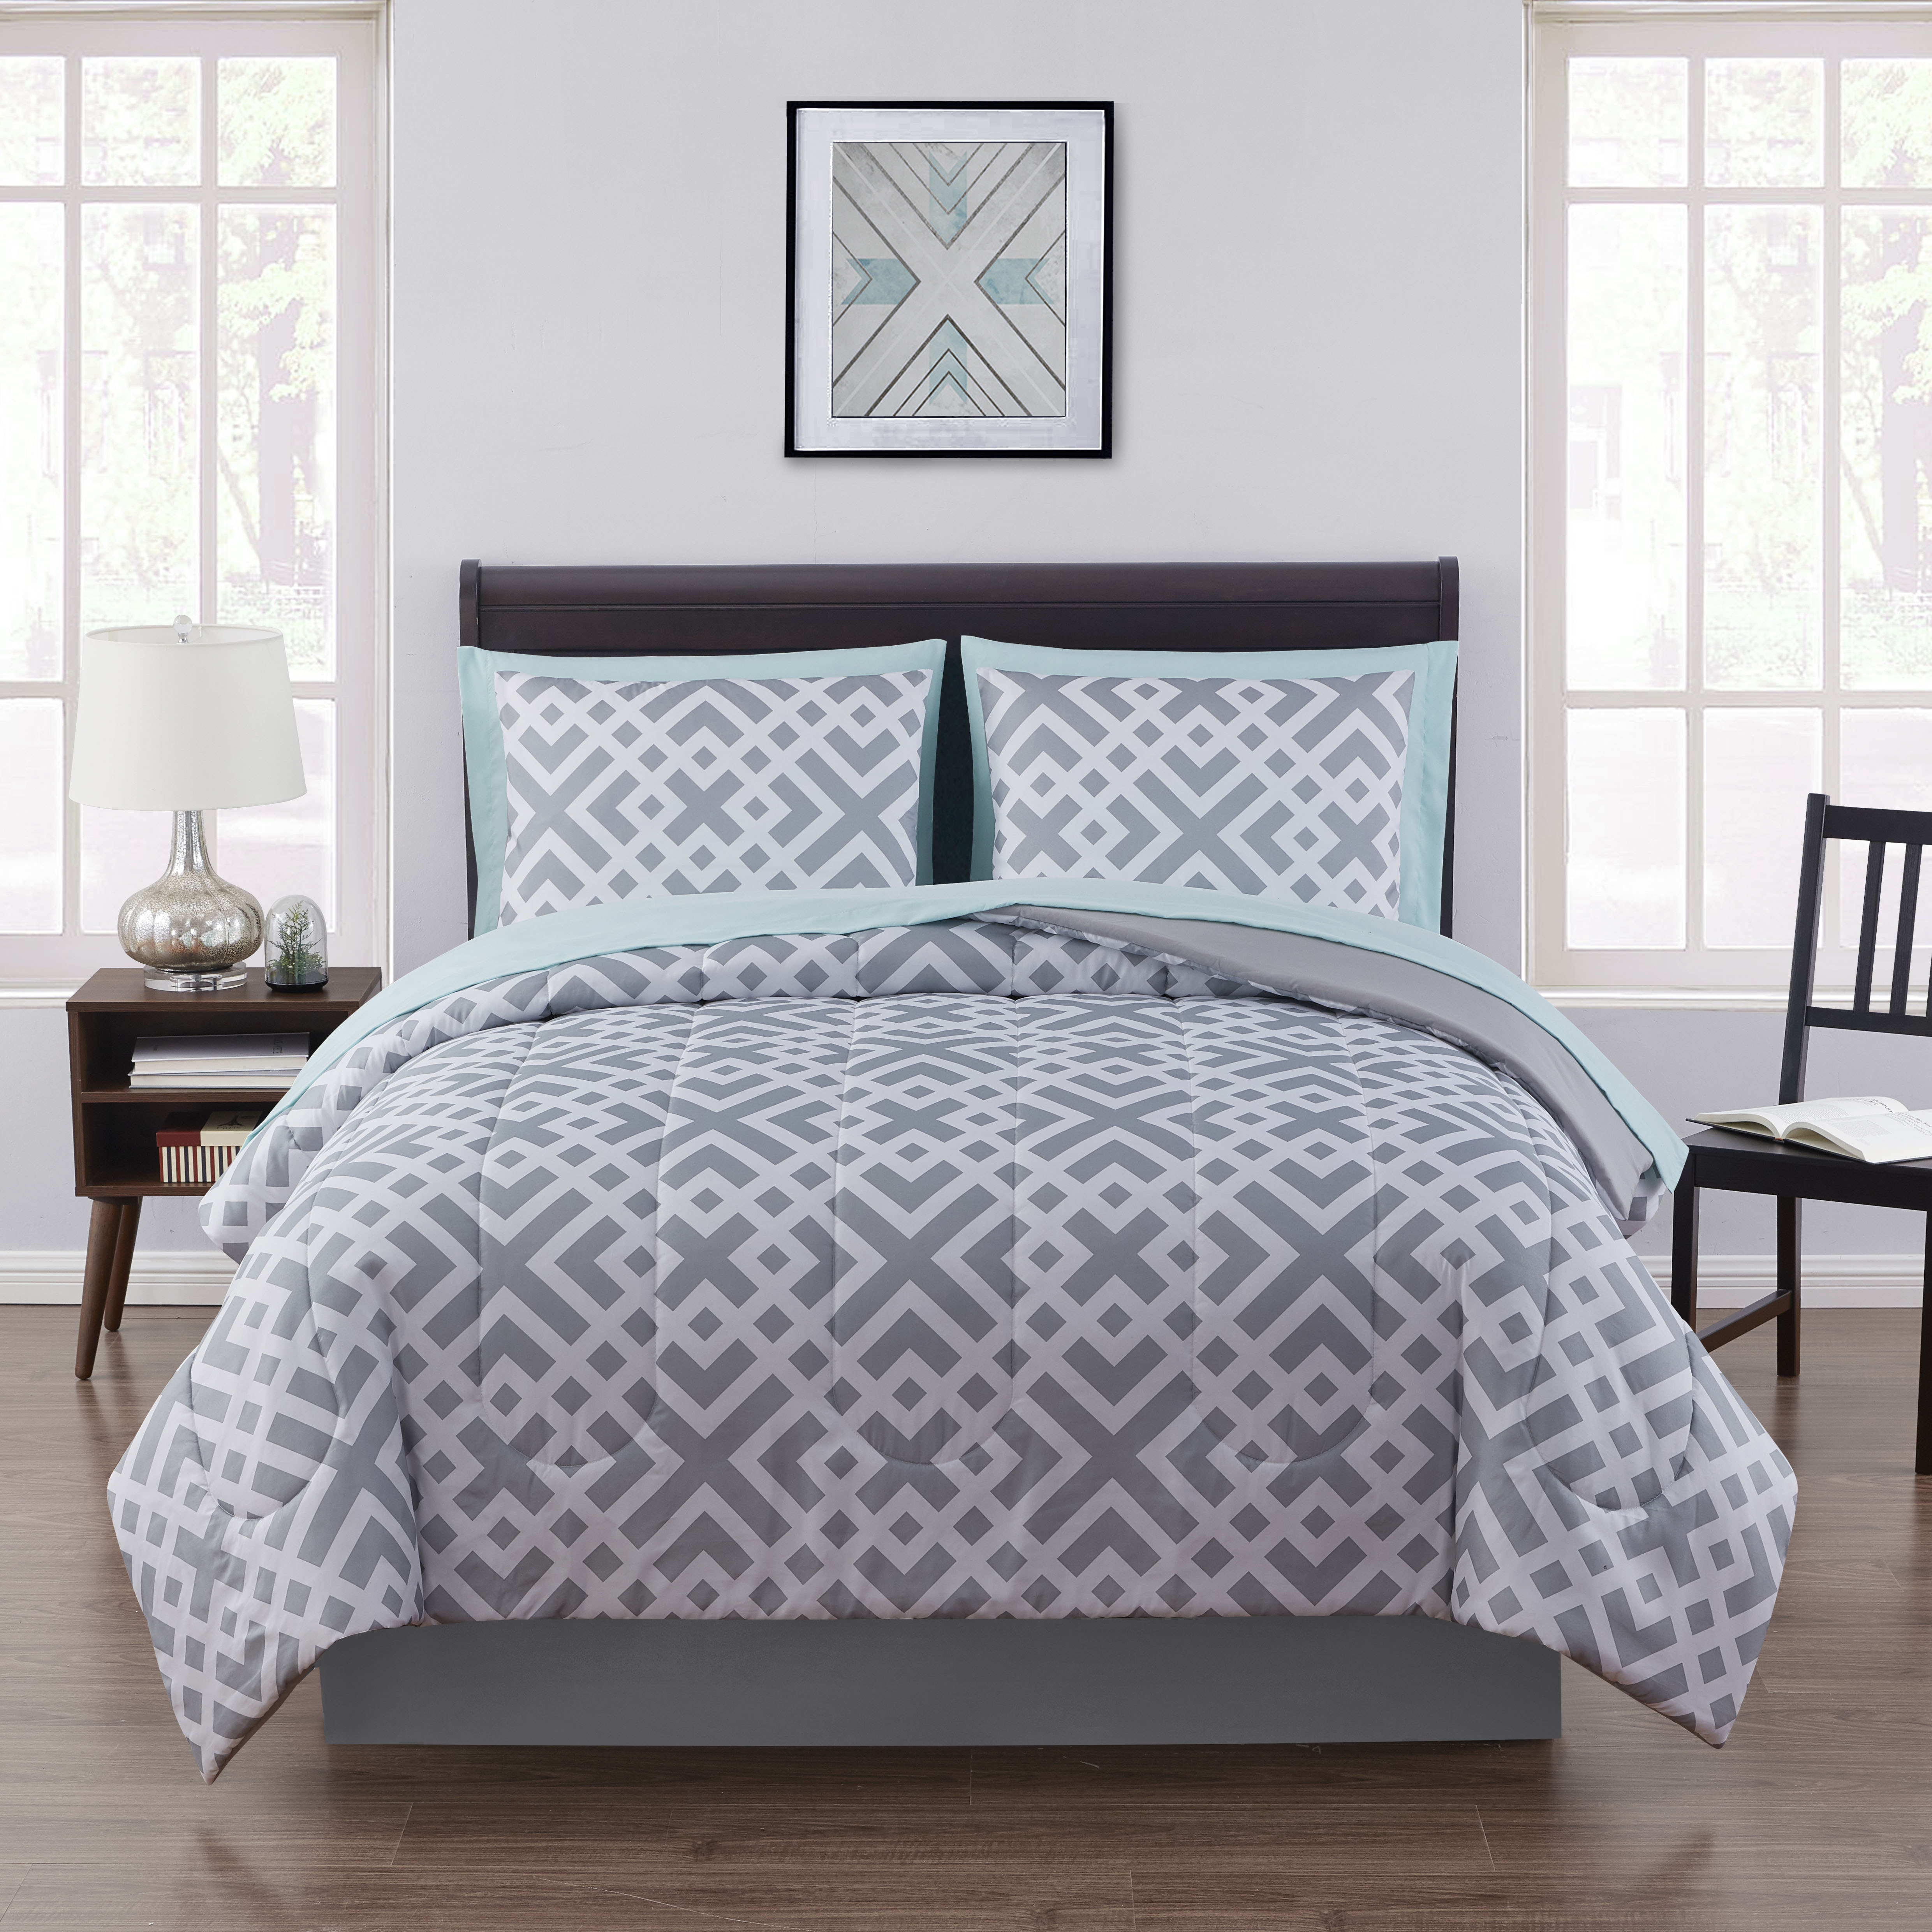 Mainstays Gray Geometric 6 Piece Bed in a Bag Comforter Set with Sheets, Twin/Twin-XL - image 1 of 10